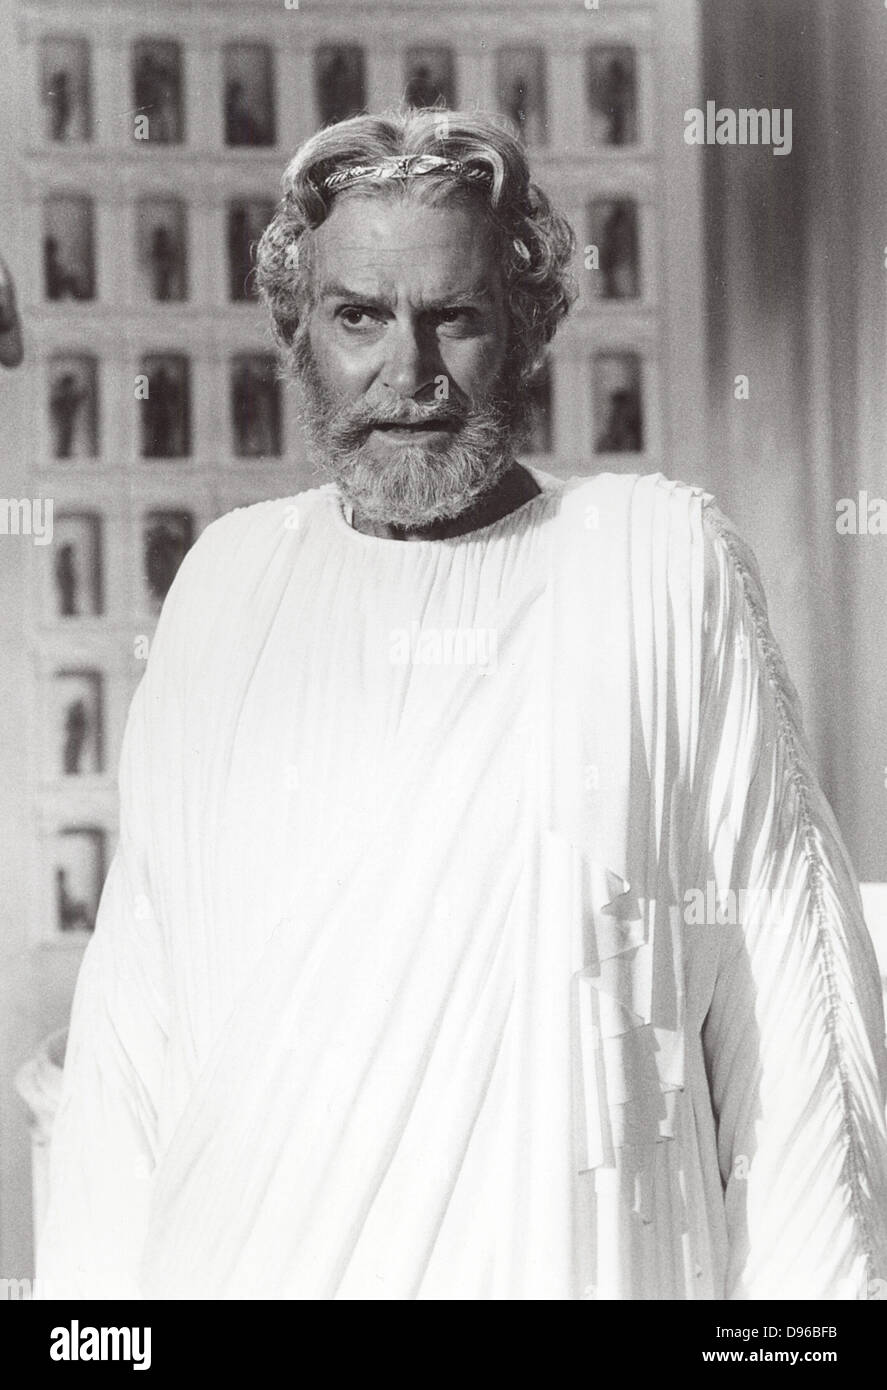 Laurence Olivier (1907-1989) English actor, producer and director. Still of Olivier as the god Zeus from the 1981 film 'Clash of the Titans'. MGM. Stock Photo